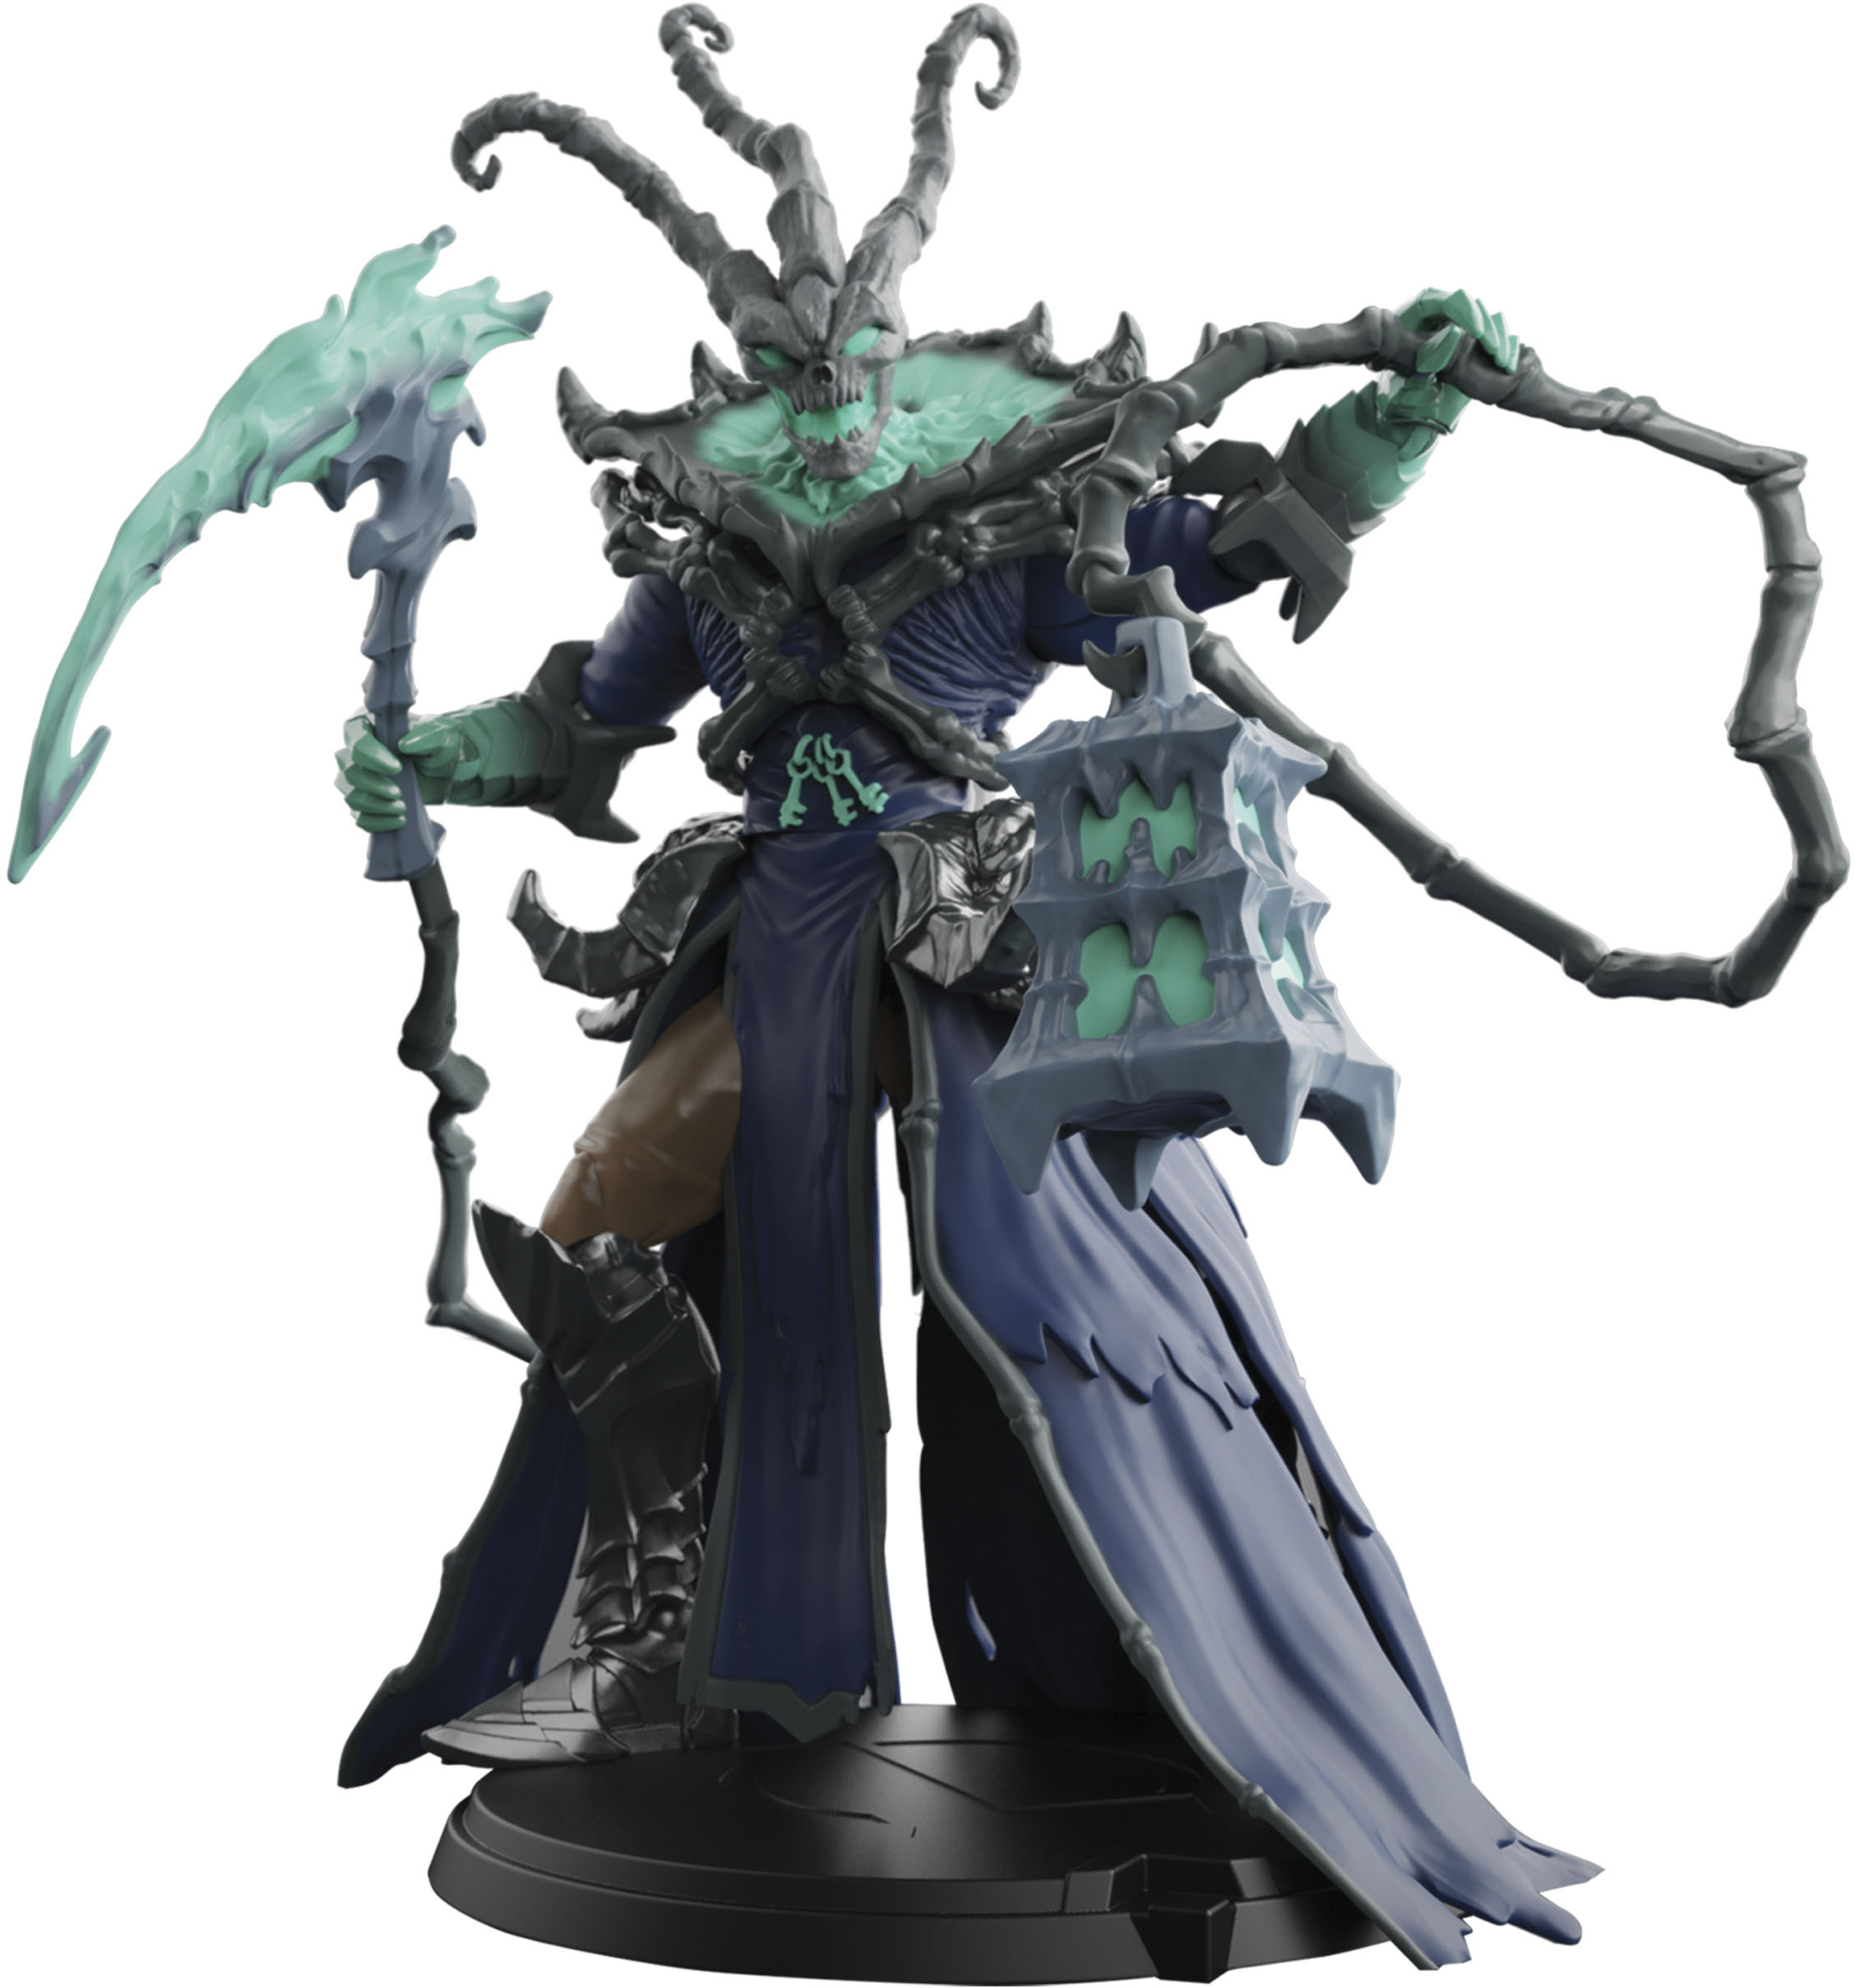 League of Legends 6-Inch Thresh Collectible Figure w/ Premium Details and Accessories, Ages 12 and Up 6062260 - Best